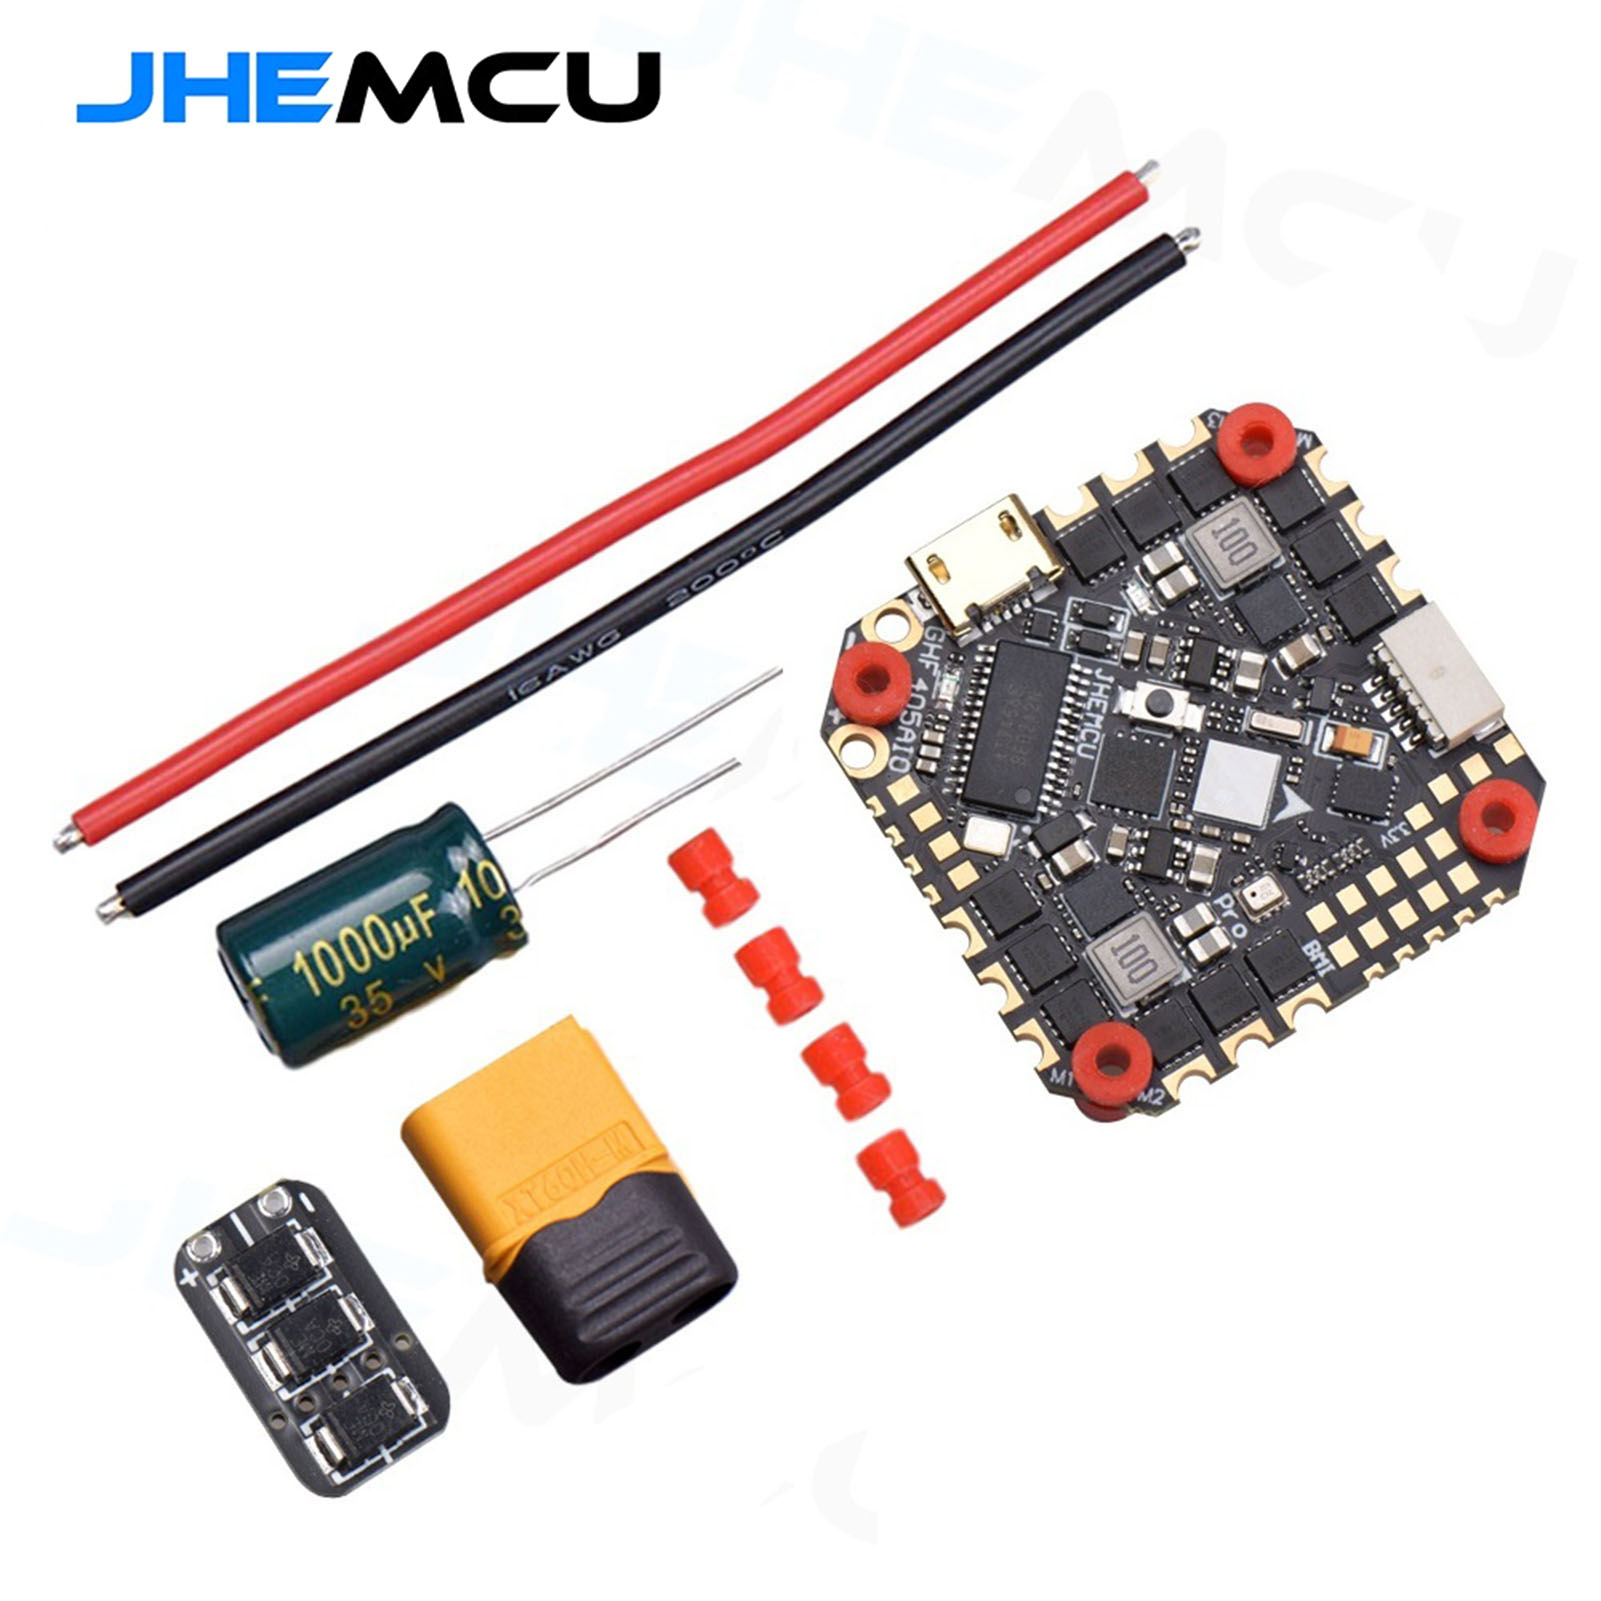 JHEMCU GHF405AIO-BMI F405 Flight Controller W5V 10V BEC Built-in 40A BLHELI_S 2-6S 4 in 1 ESC 25.5X25.5mm for - image 1 of 7